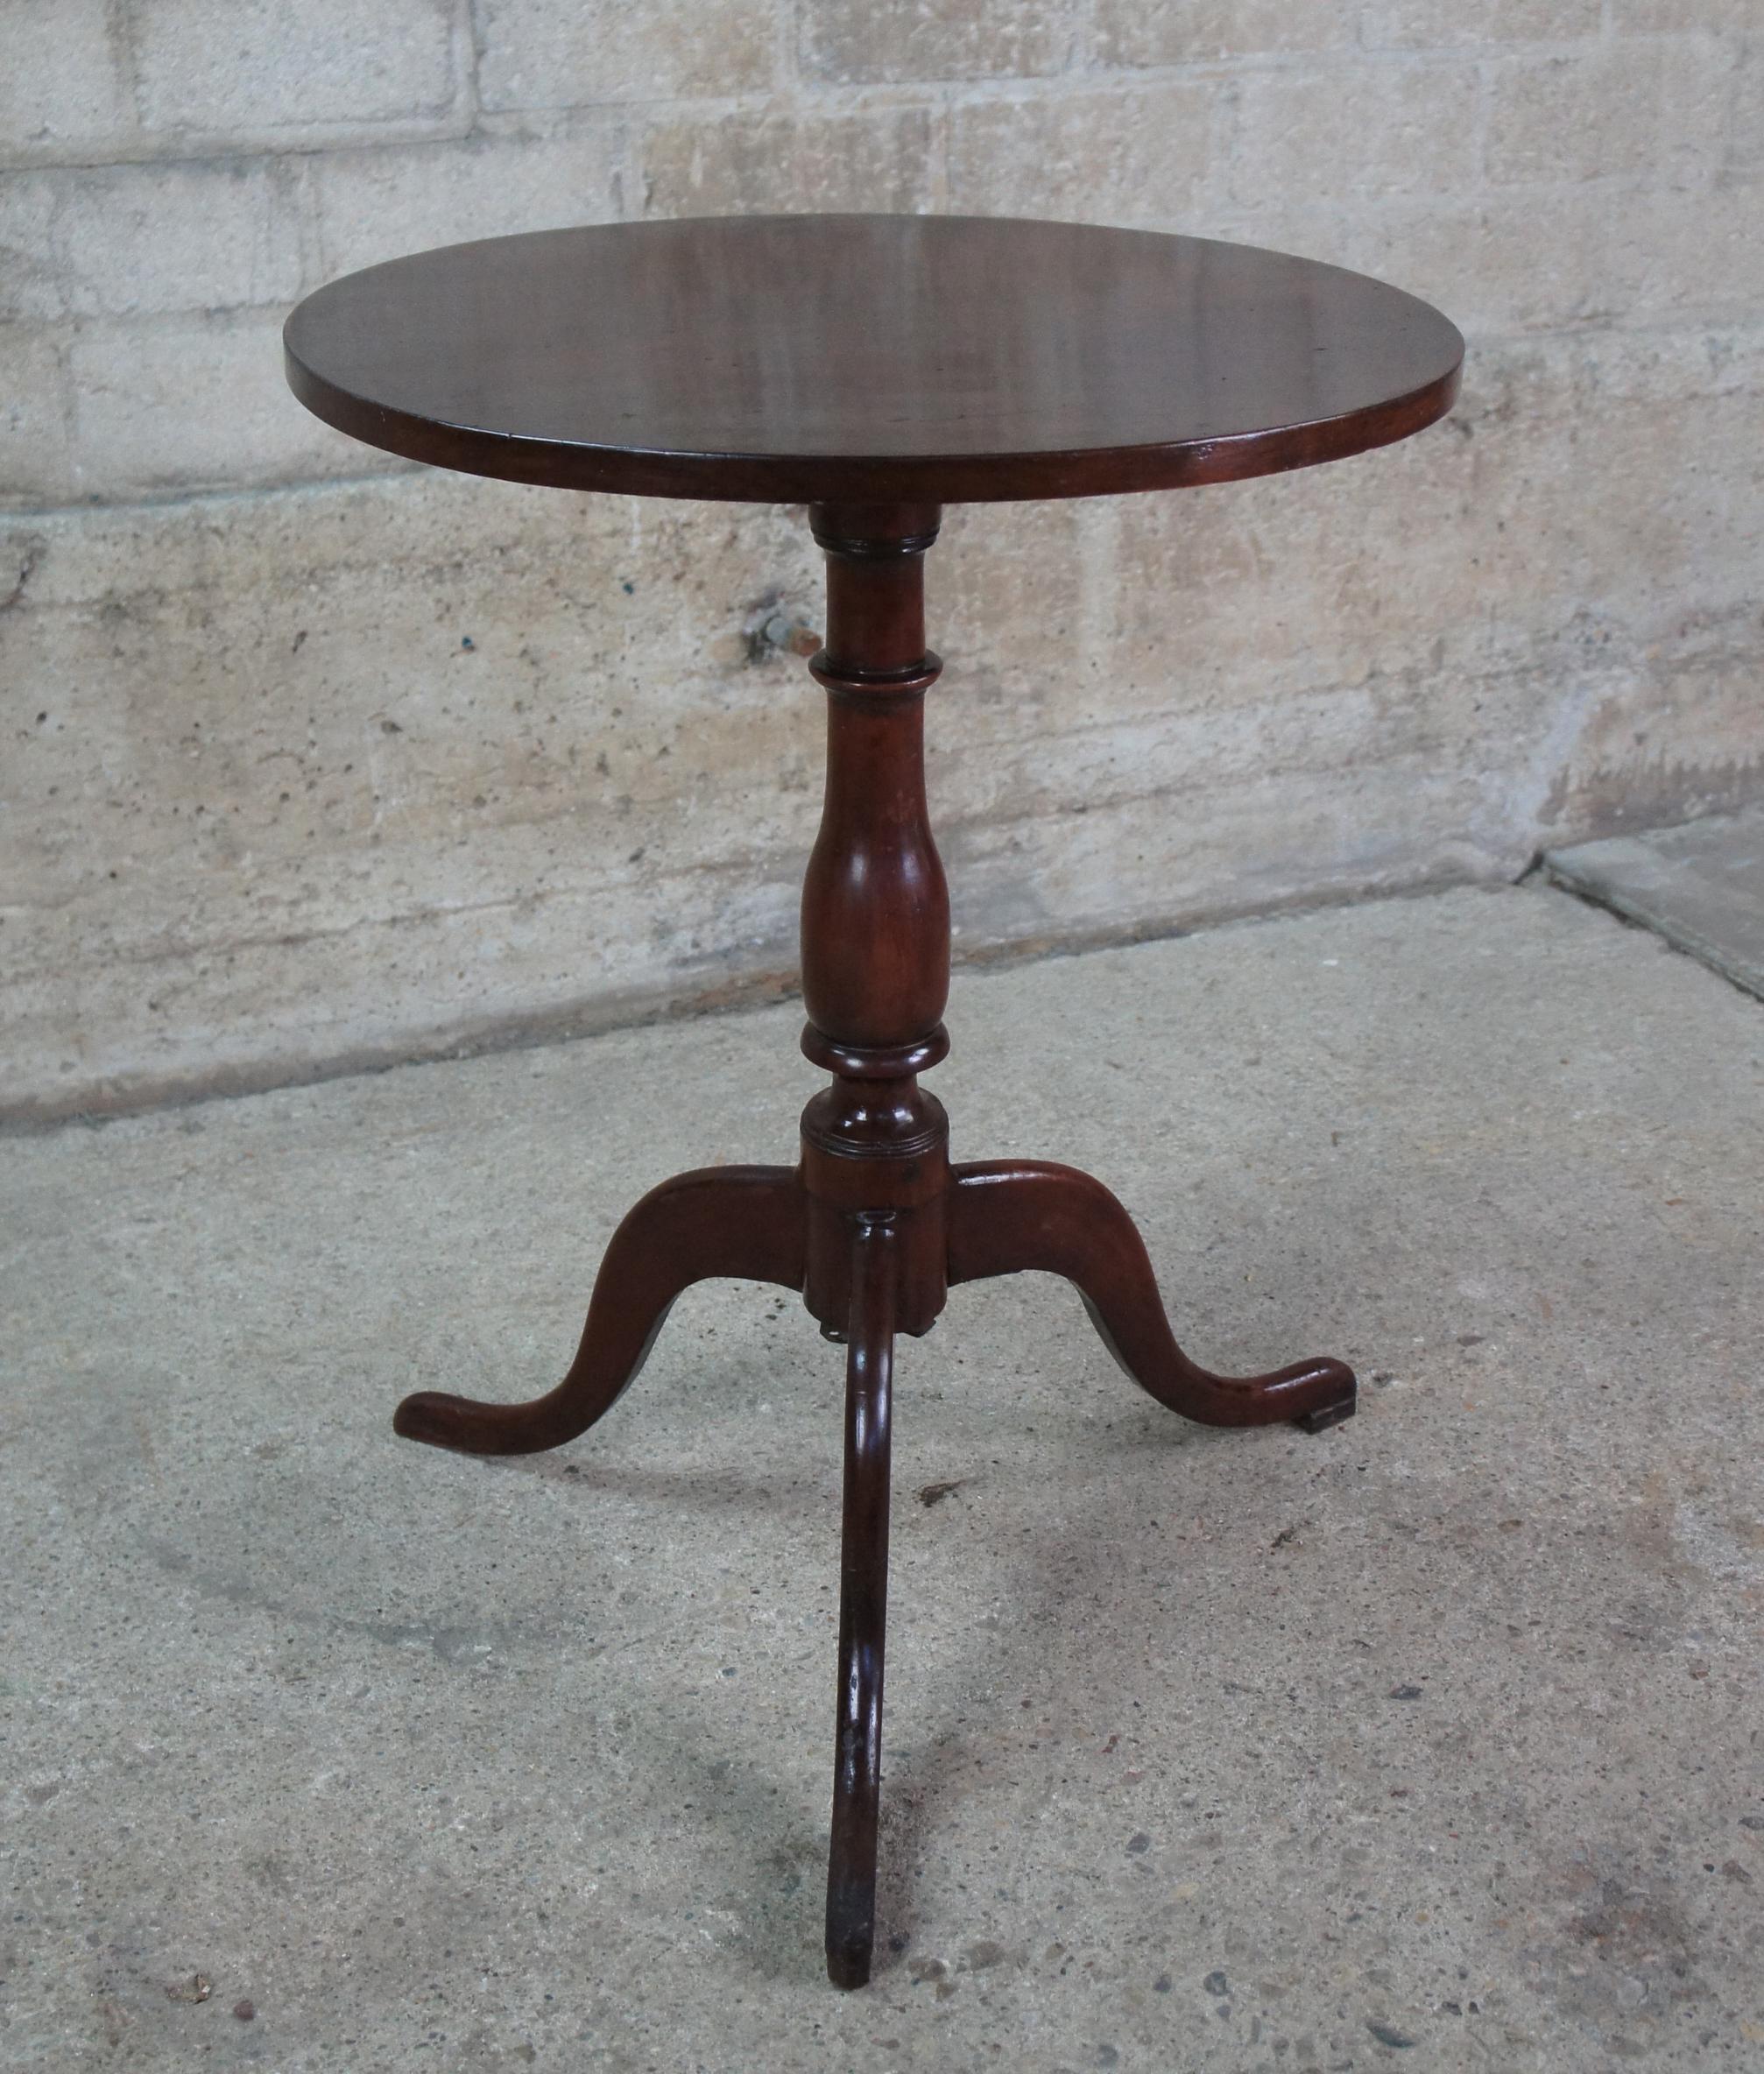 Antique 18th Century Queen Anne Mahogany Candle Stand Pedestal Table Tripod Base For Sale 1